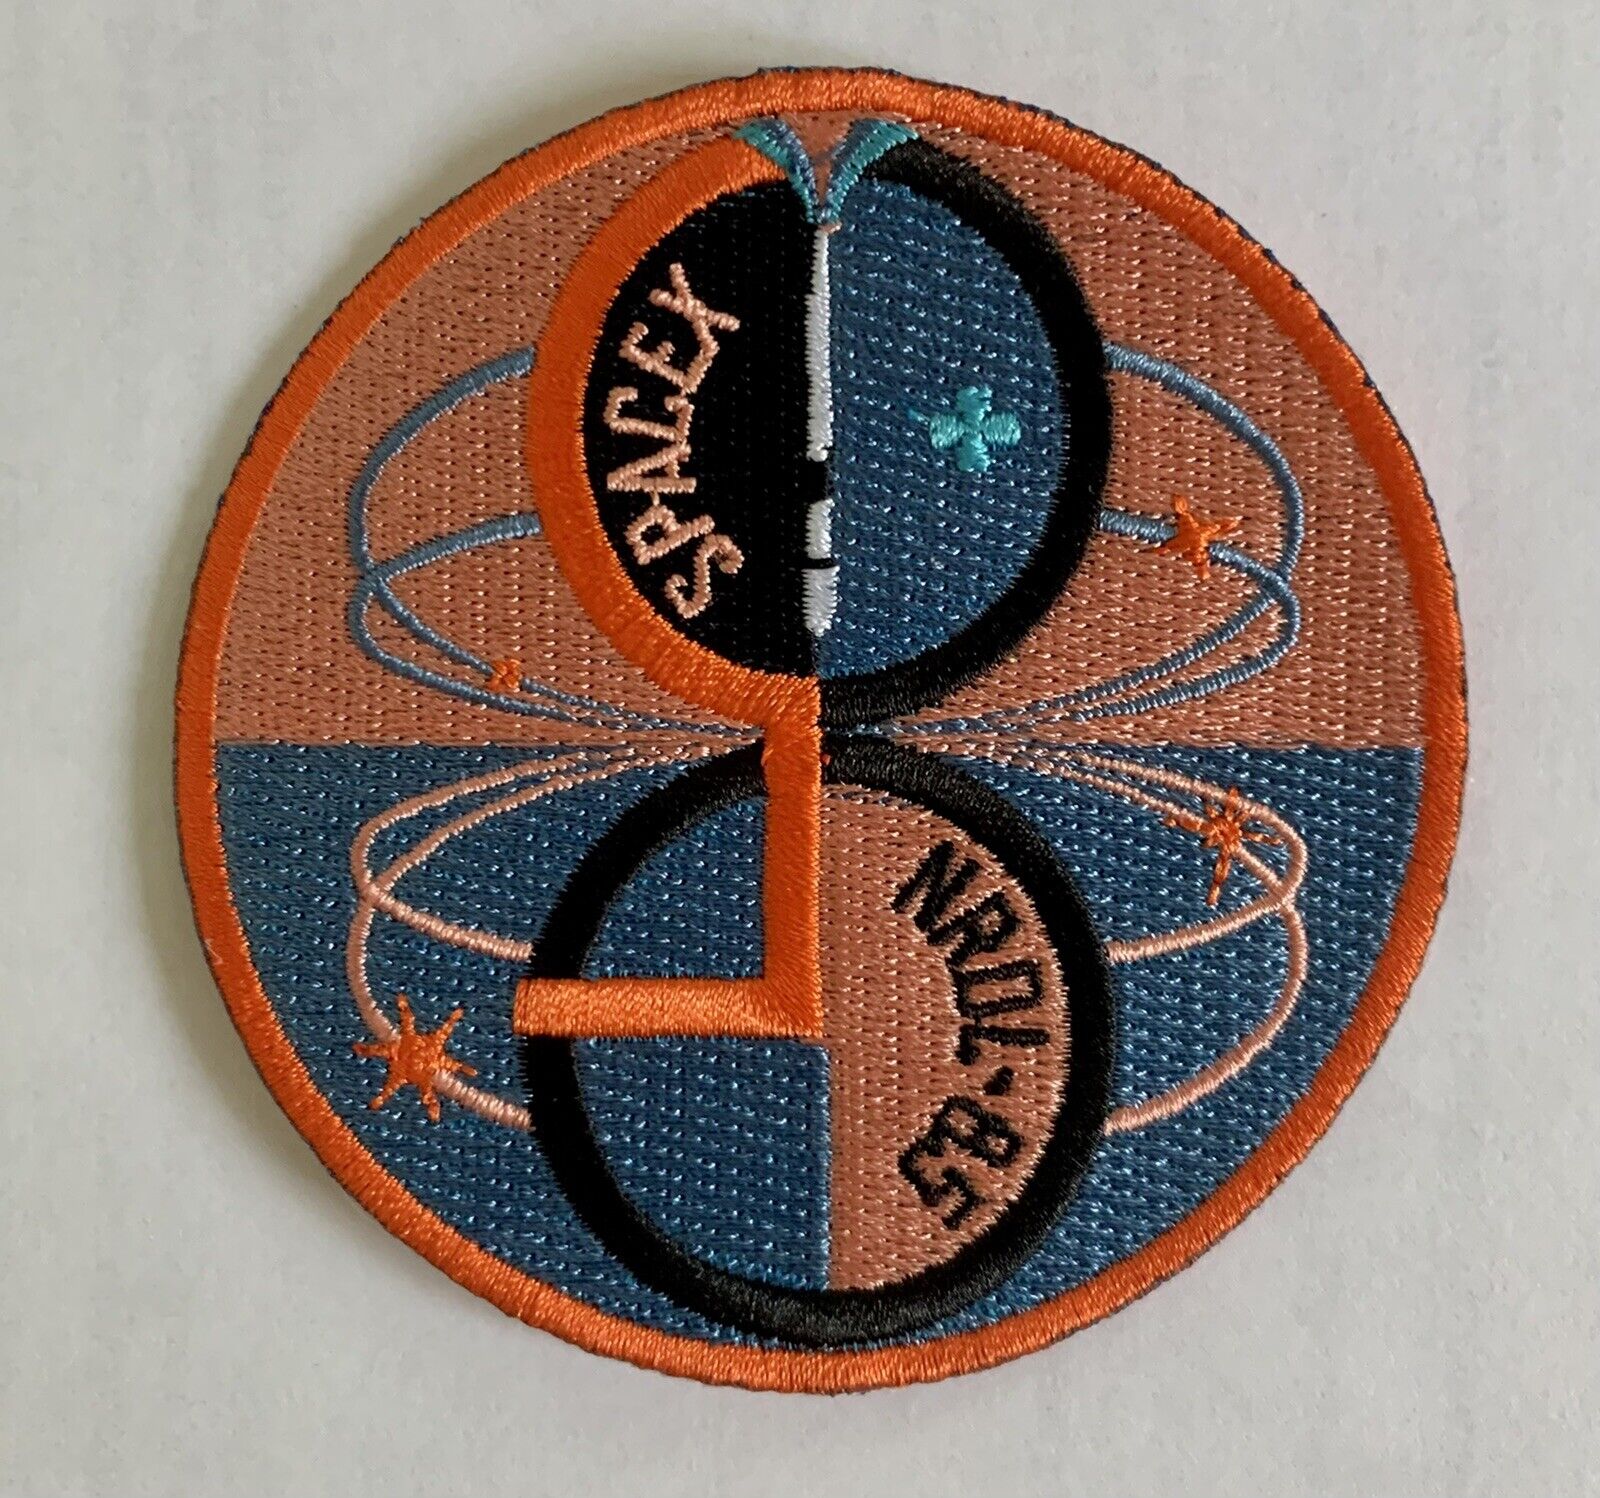 Original SPACEX NROL 85 FALCON 9 MISSION Patch 4”